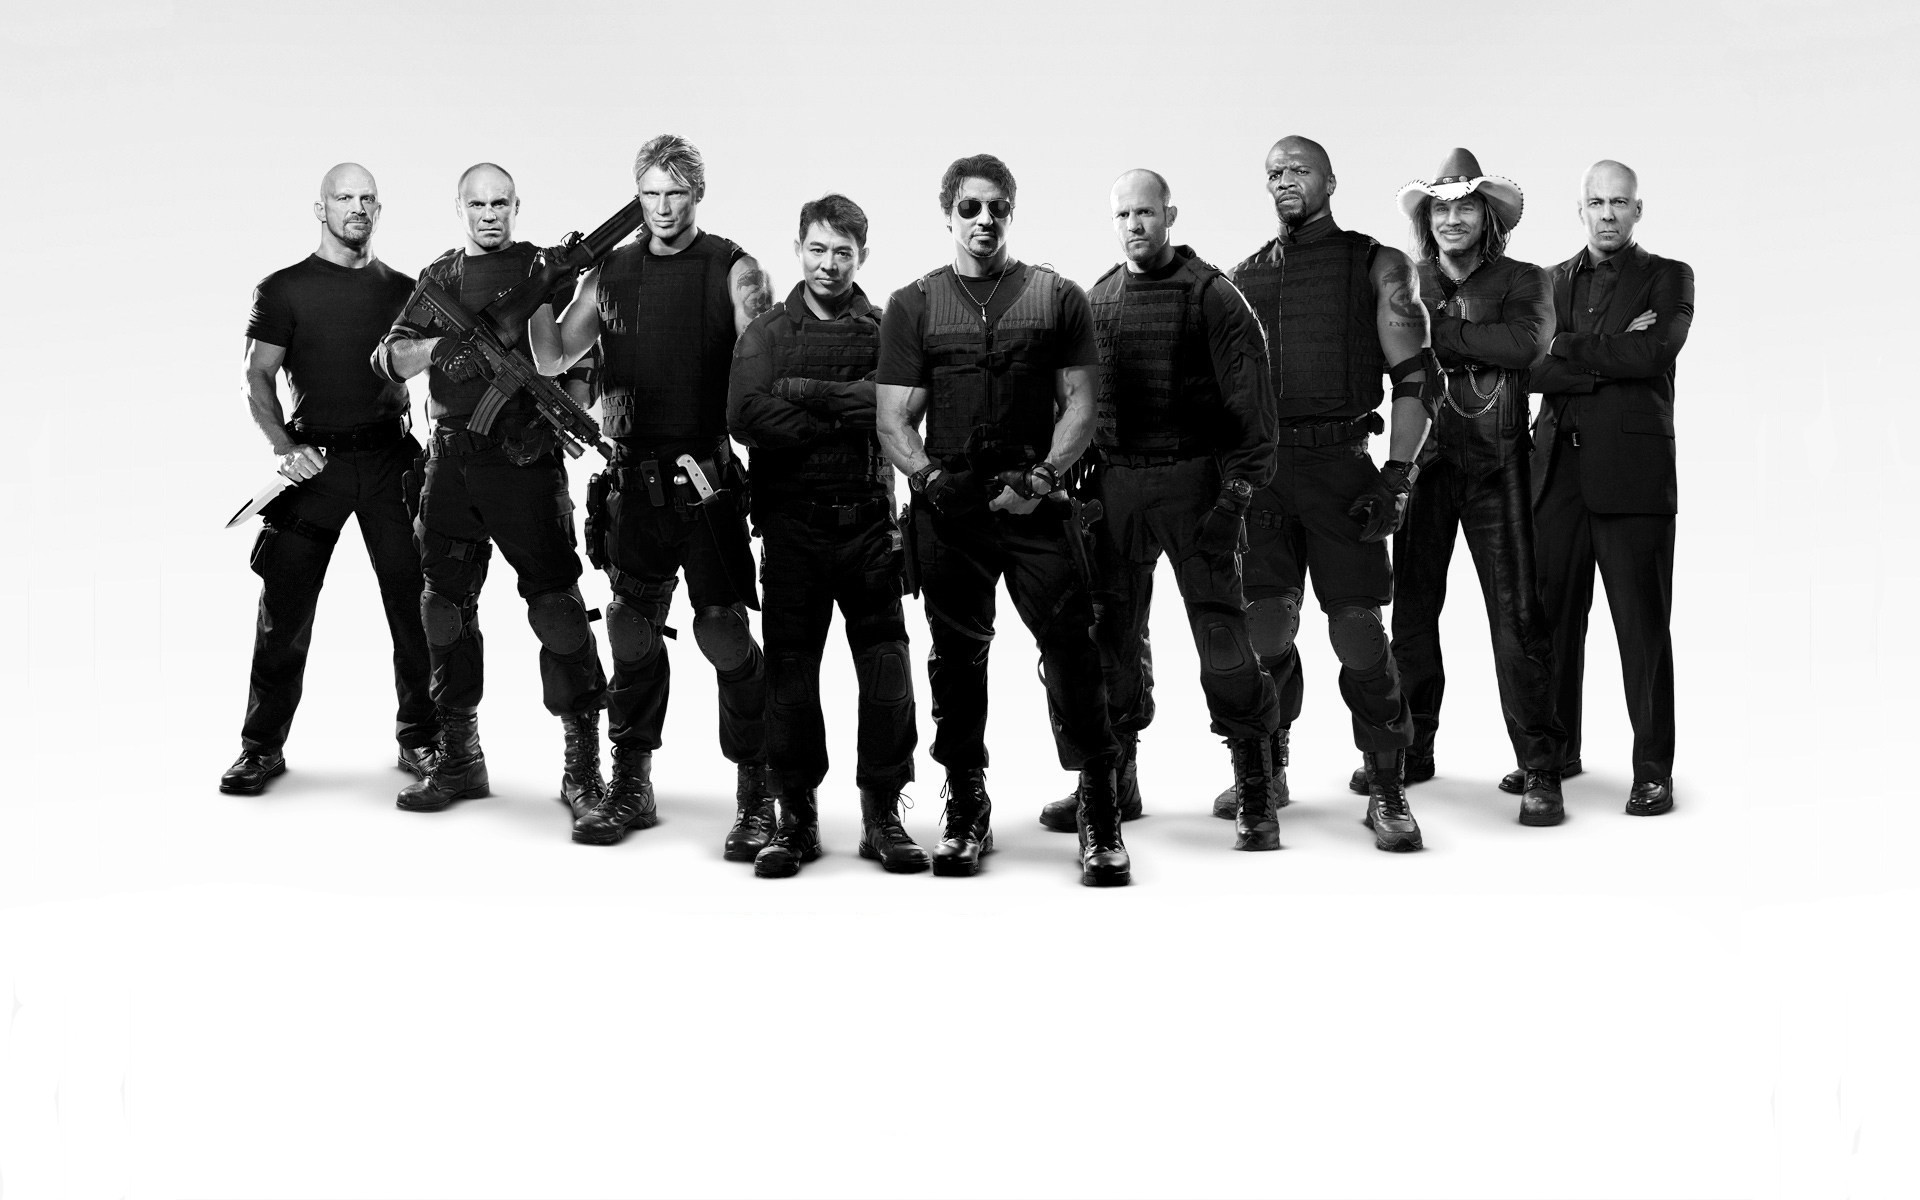 Movie The Expendables HD Wallpaper